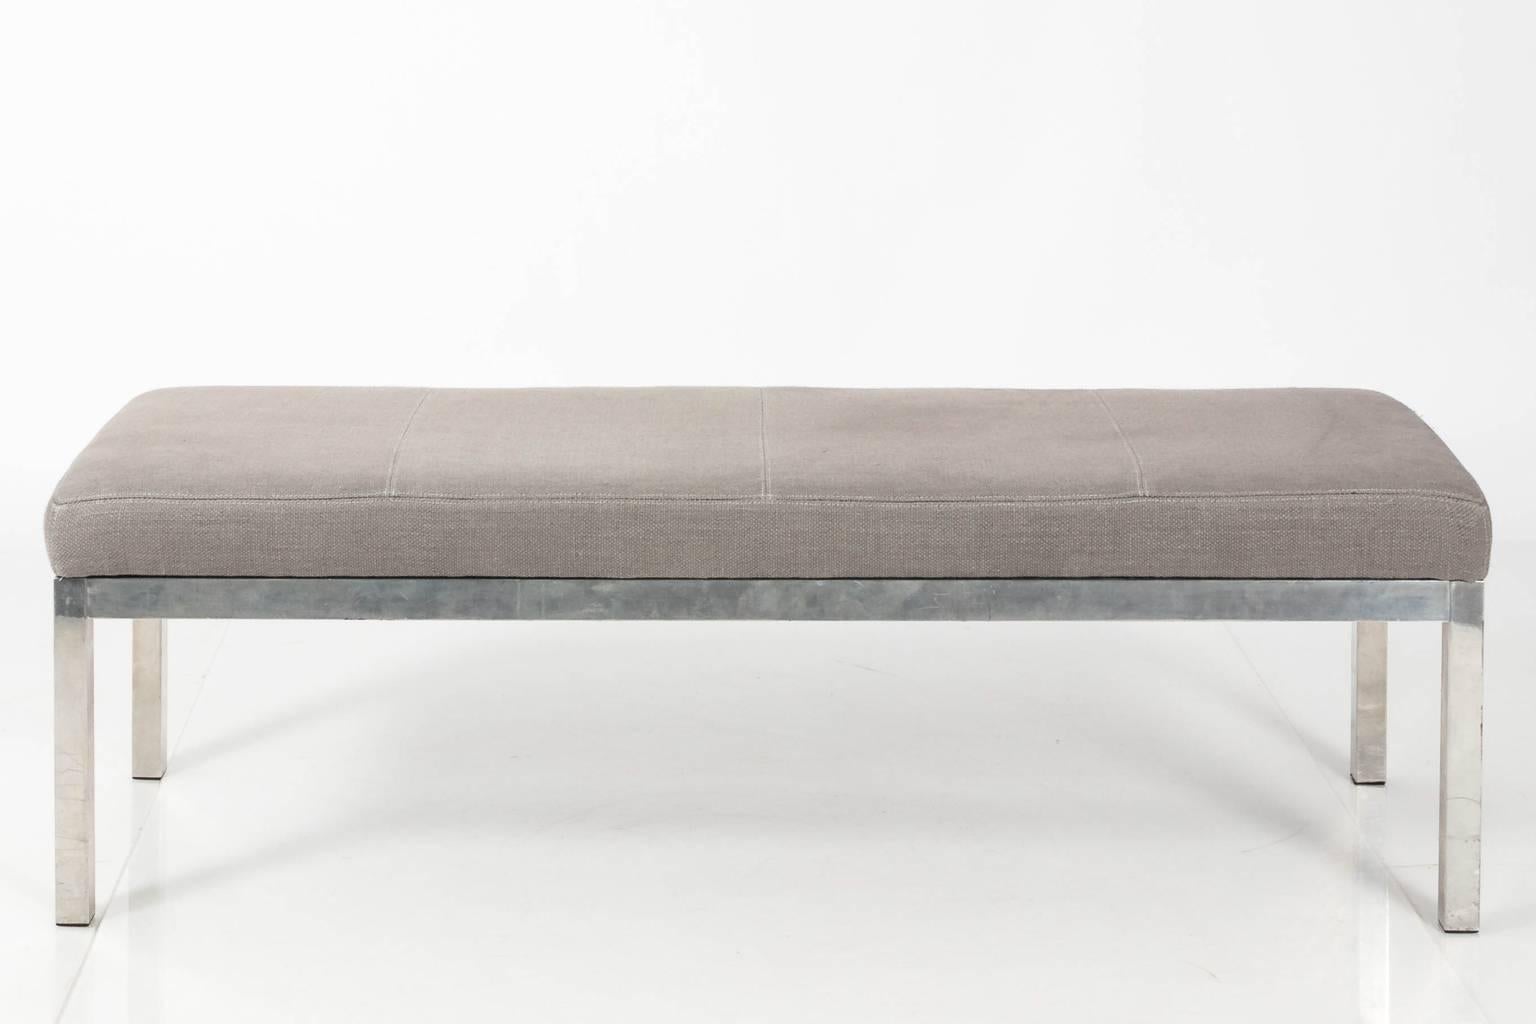 Vintage upholstered bench with chrome base. Newly upholstered in grey linen.